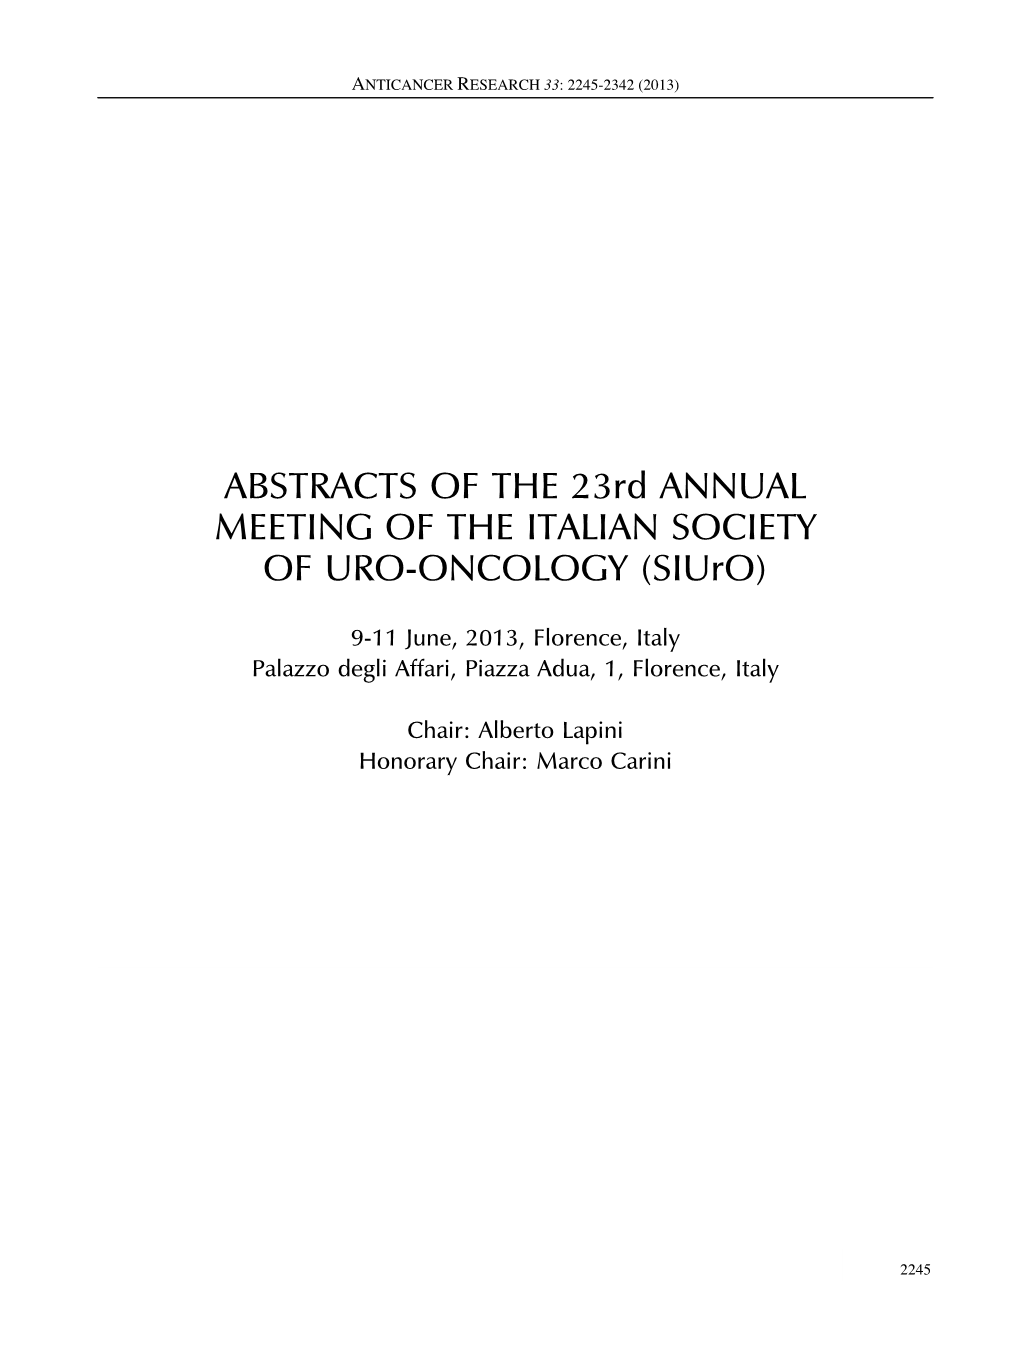 ABSTRACTS of the 23Rd ANNUAL MEETING of the ITALIAN SOCIETY of URO-ONCOLOGY (Siuro)